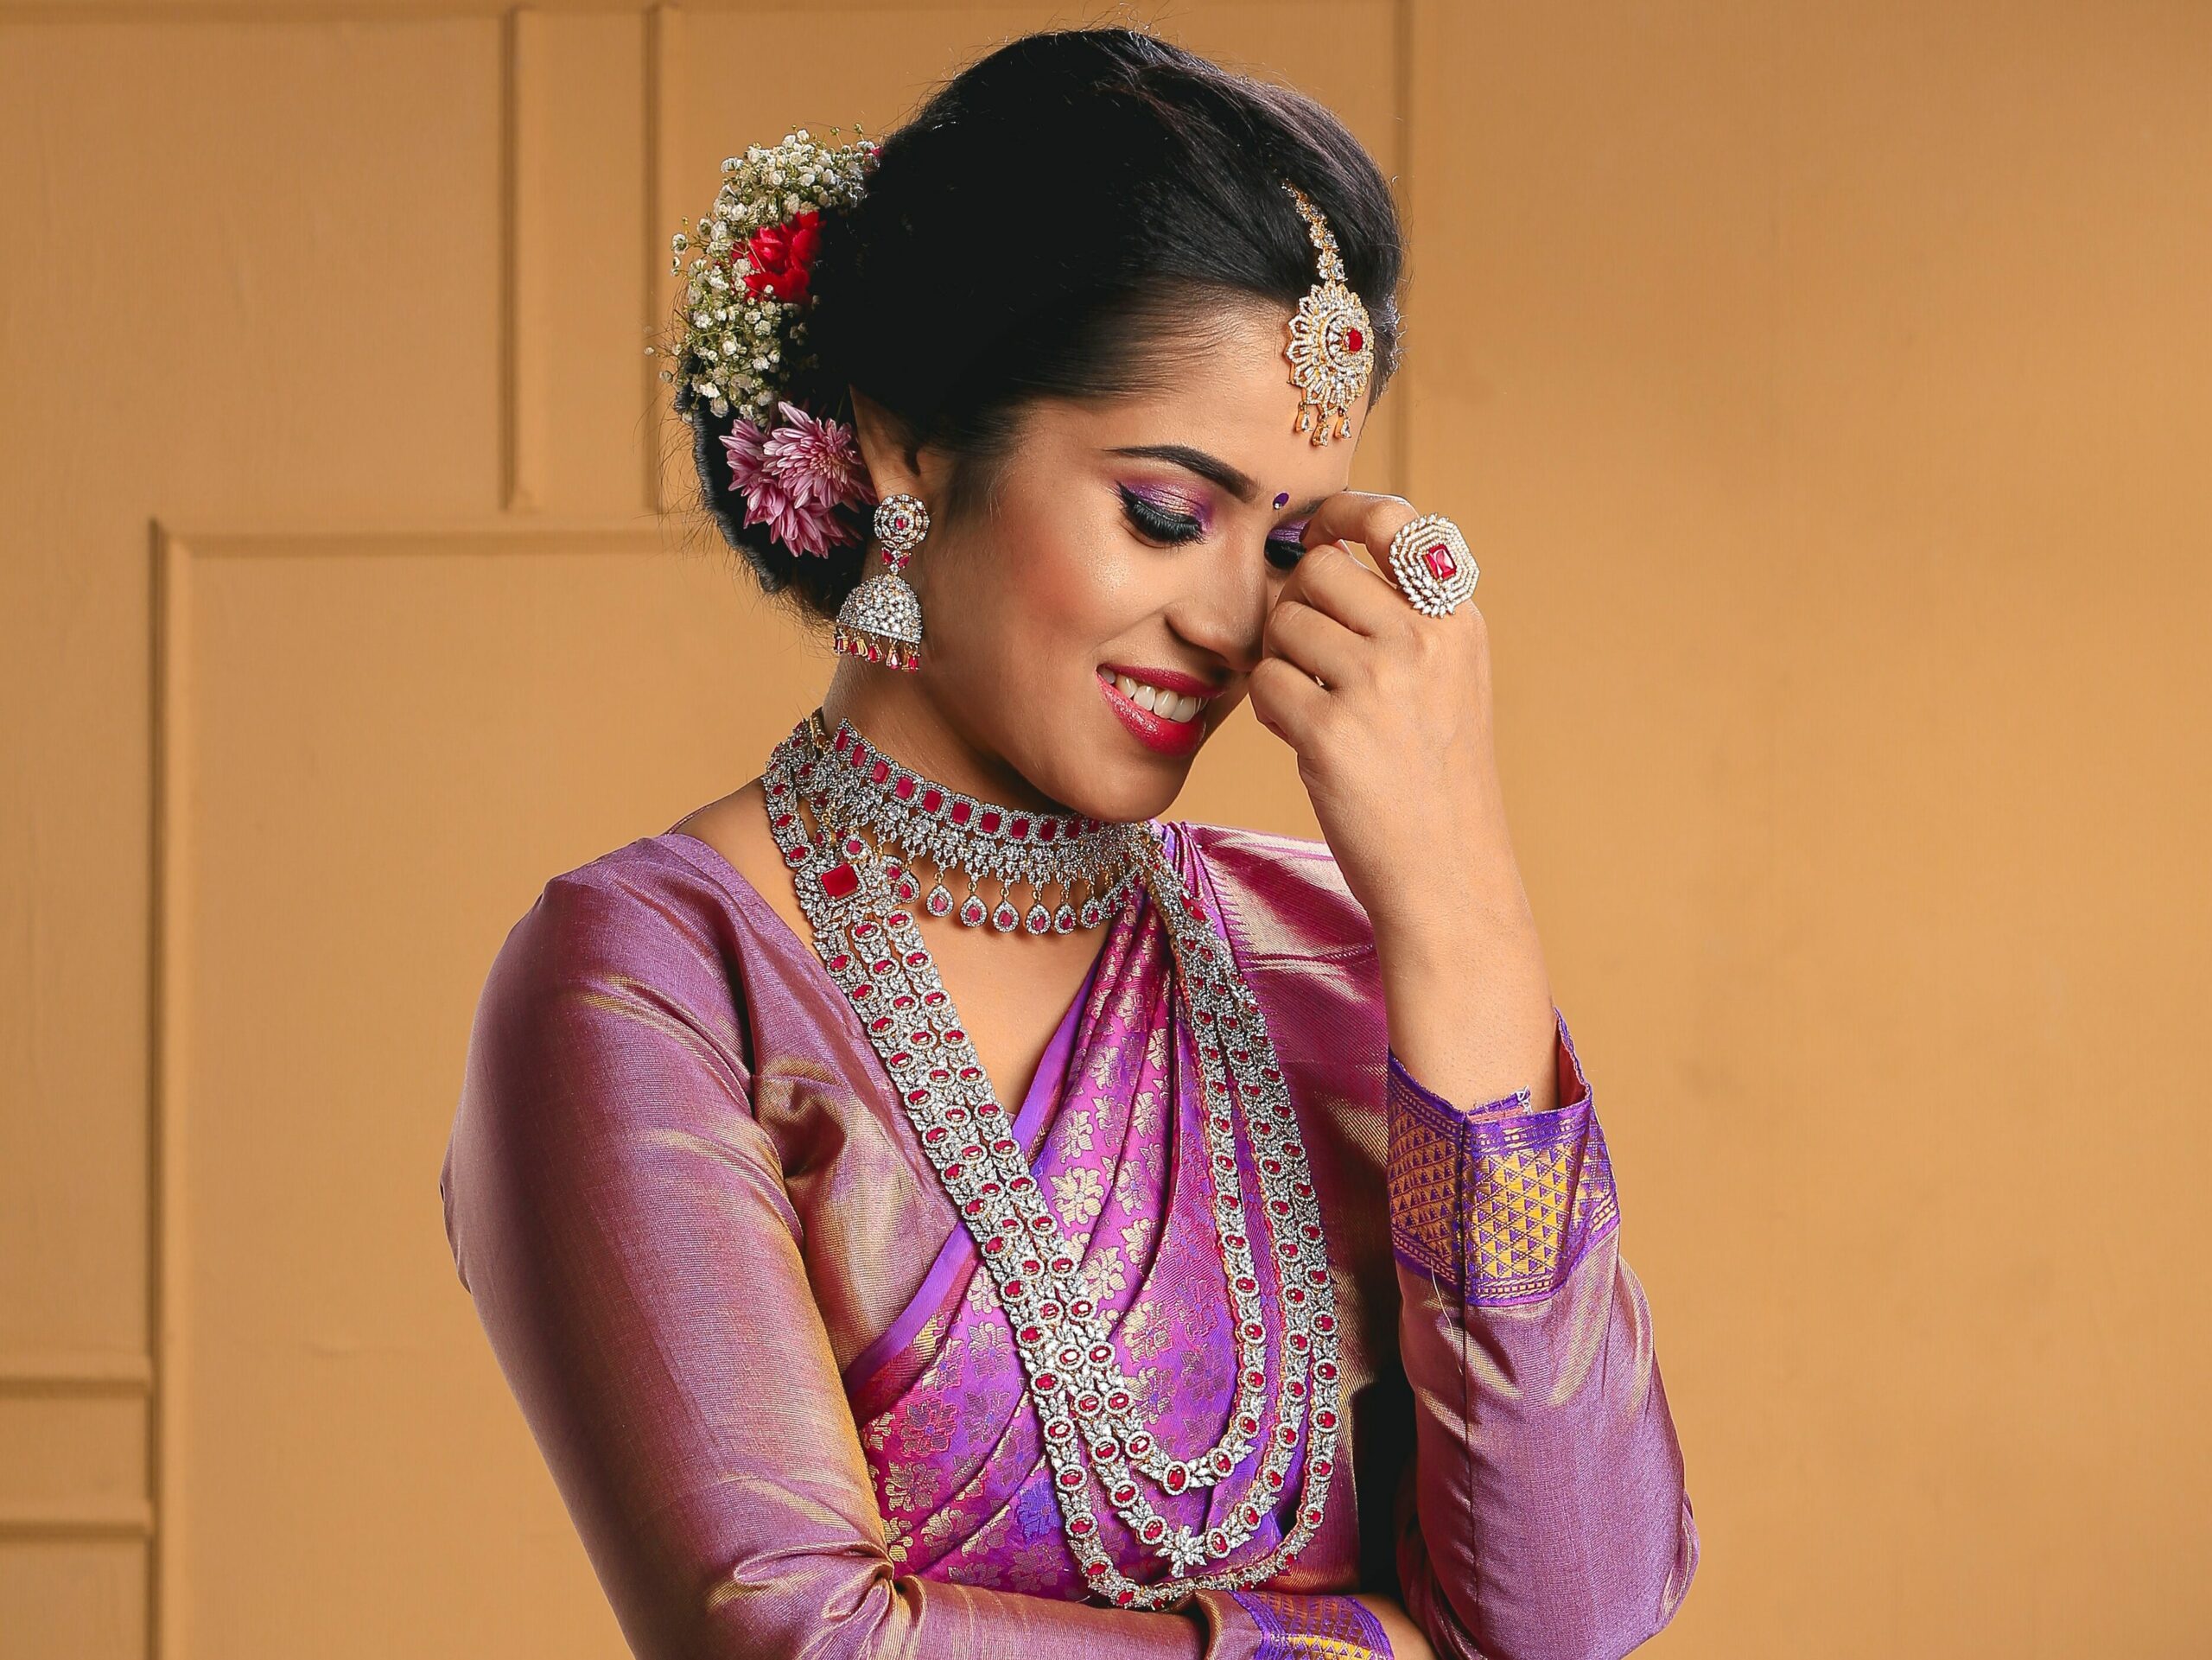 How To Pick The Right Jewellery For A Saree?